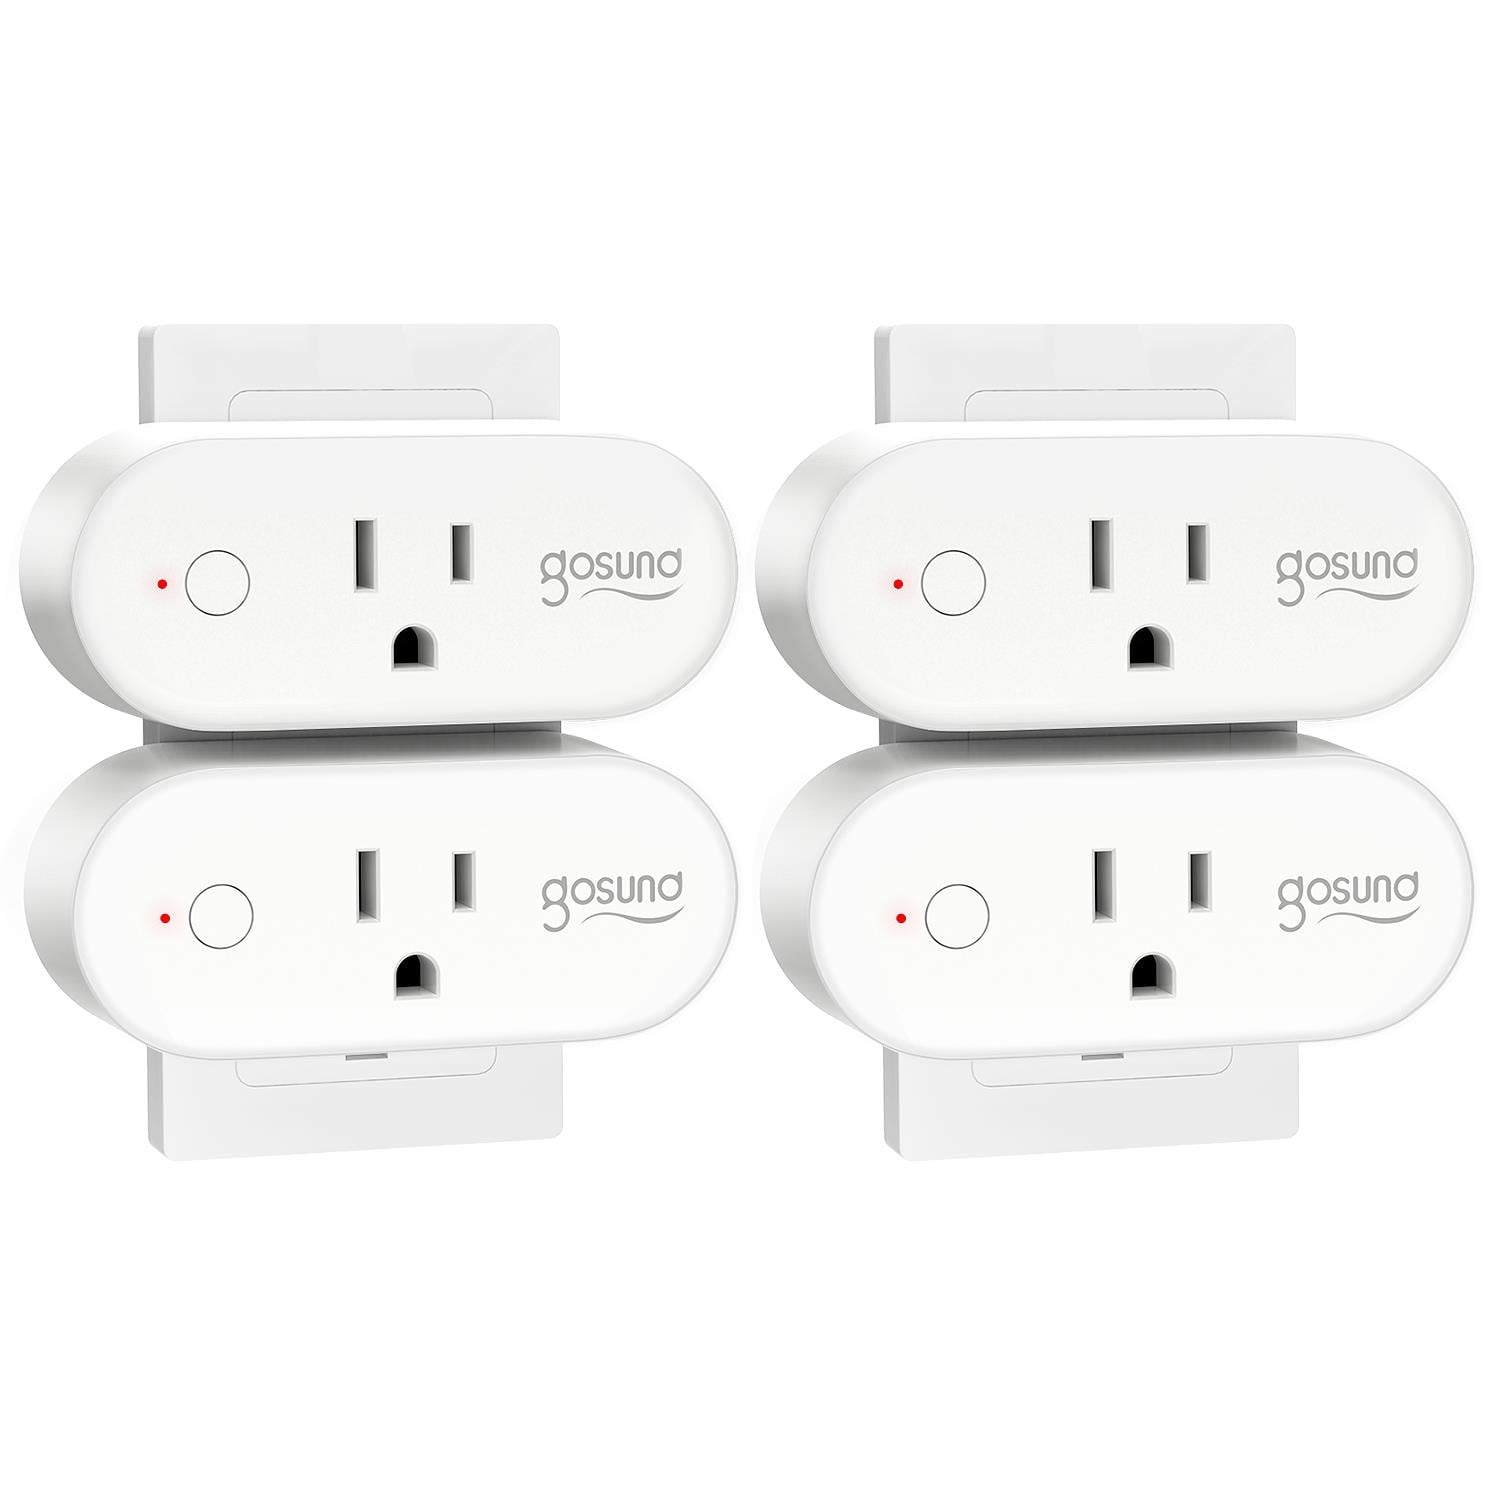 GE myTouchSmart 120-Volt 1-Outlet Indoor/Outdoor Smart Plug in the Smart  Plugs department at